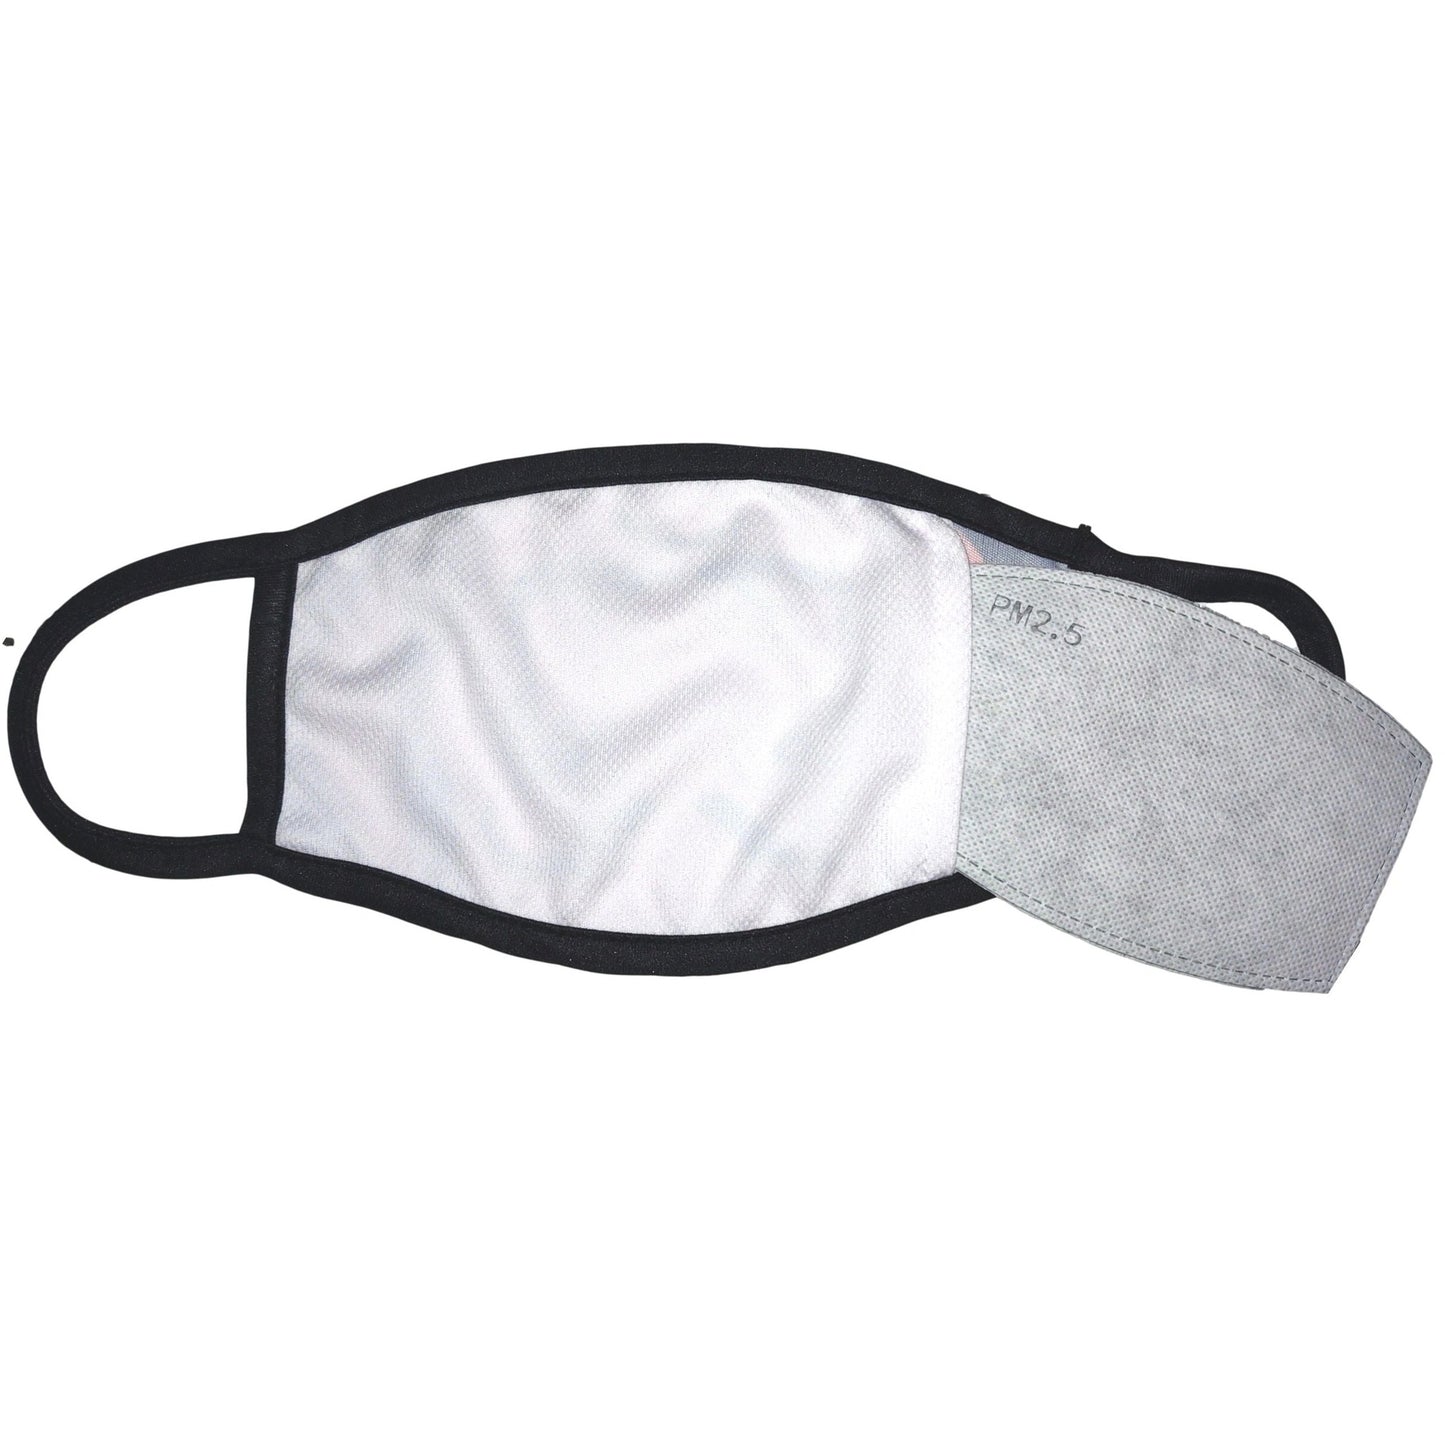 Washable and Reusable PM2.5 Filter Fashion Mask